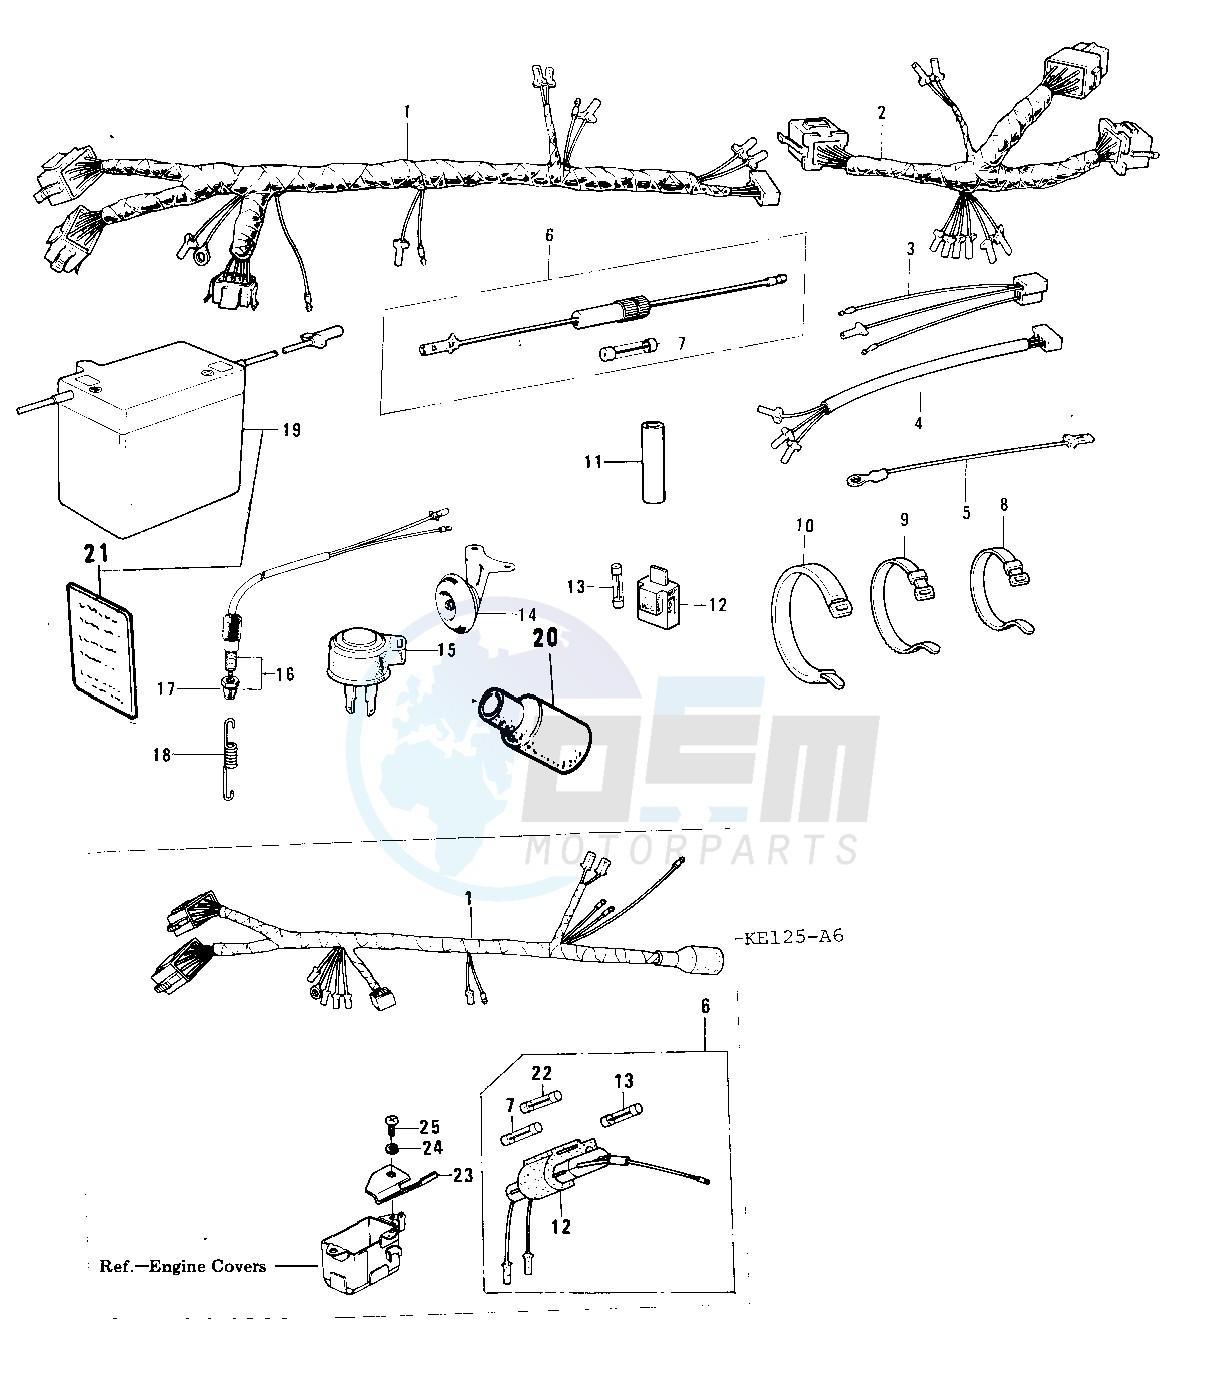 CHASSIS ELECTRICAL EQUIPMENT -- 76-79- - blueprint